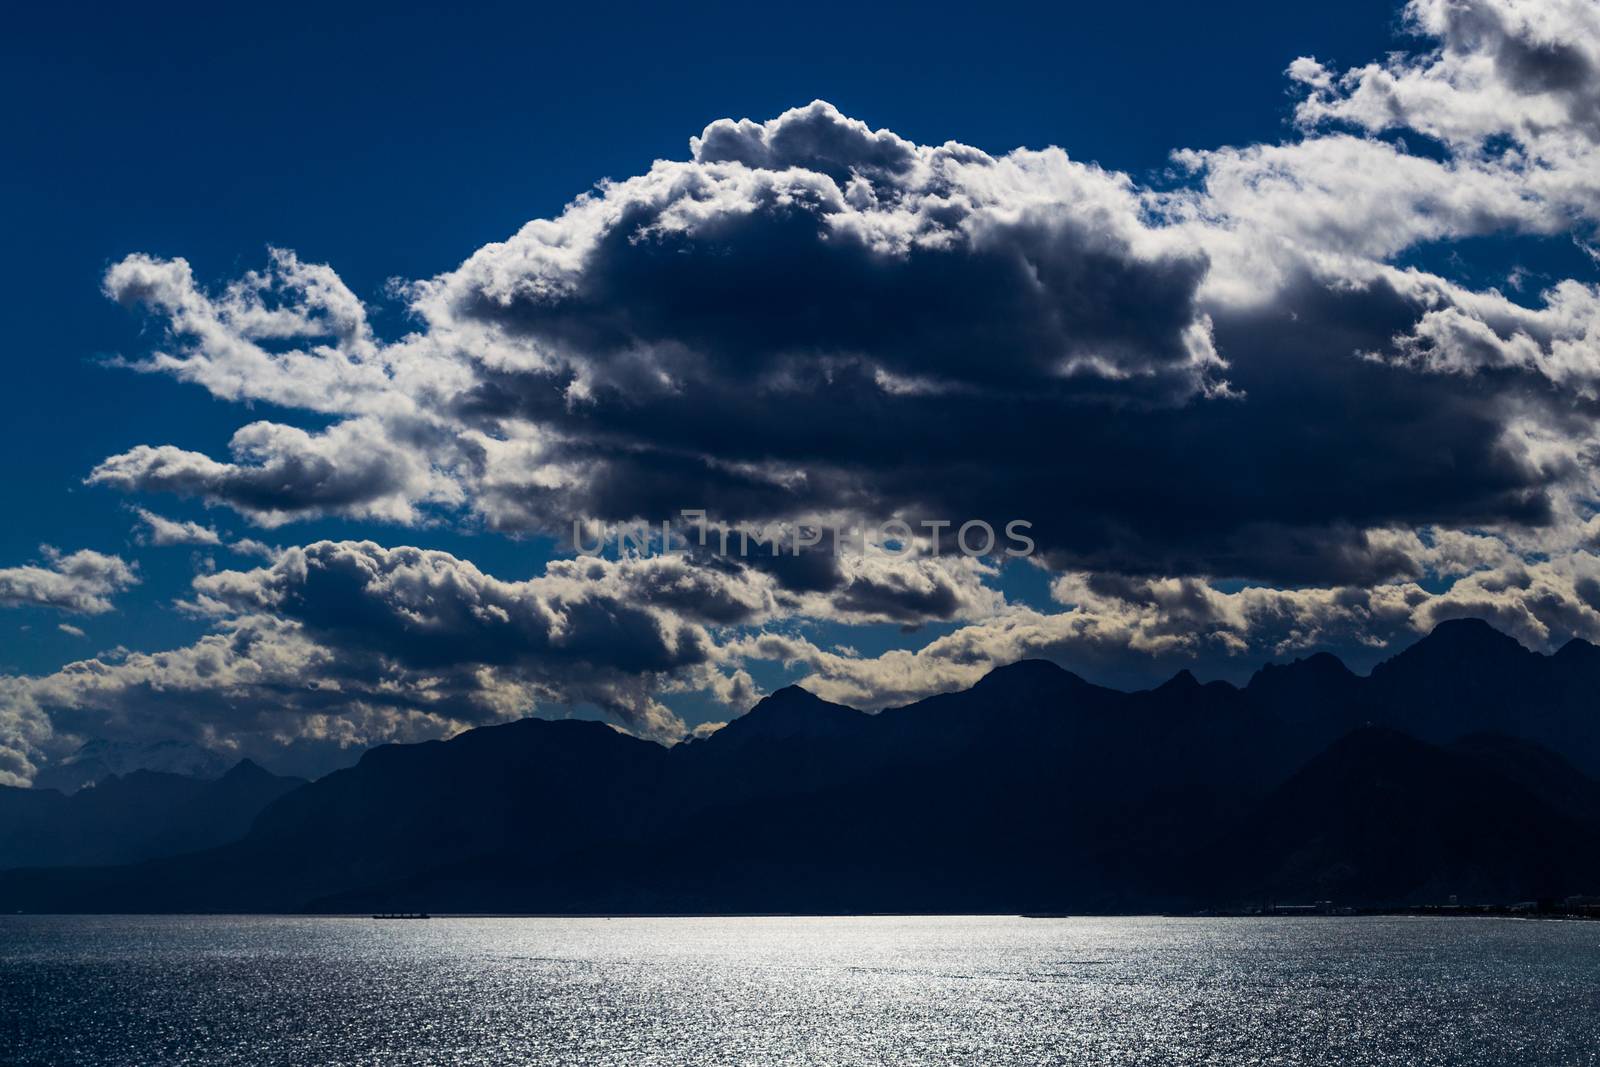 Clouds over the sea by rmbarricarte